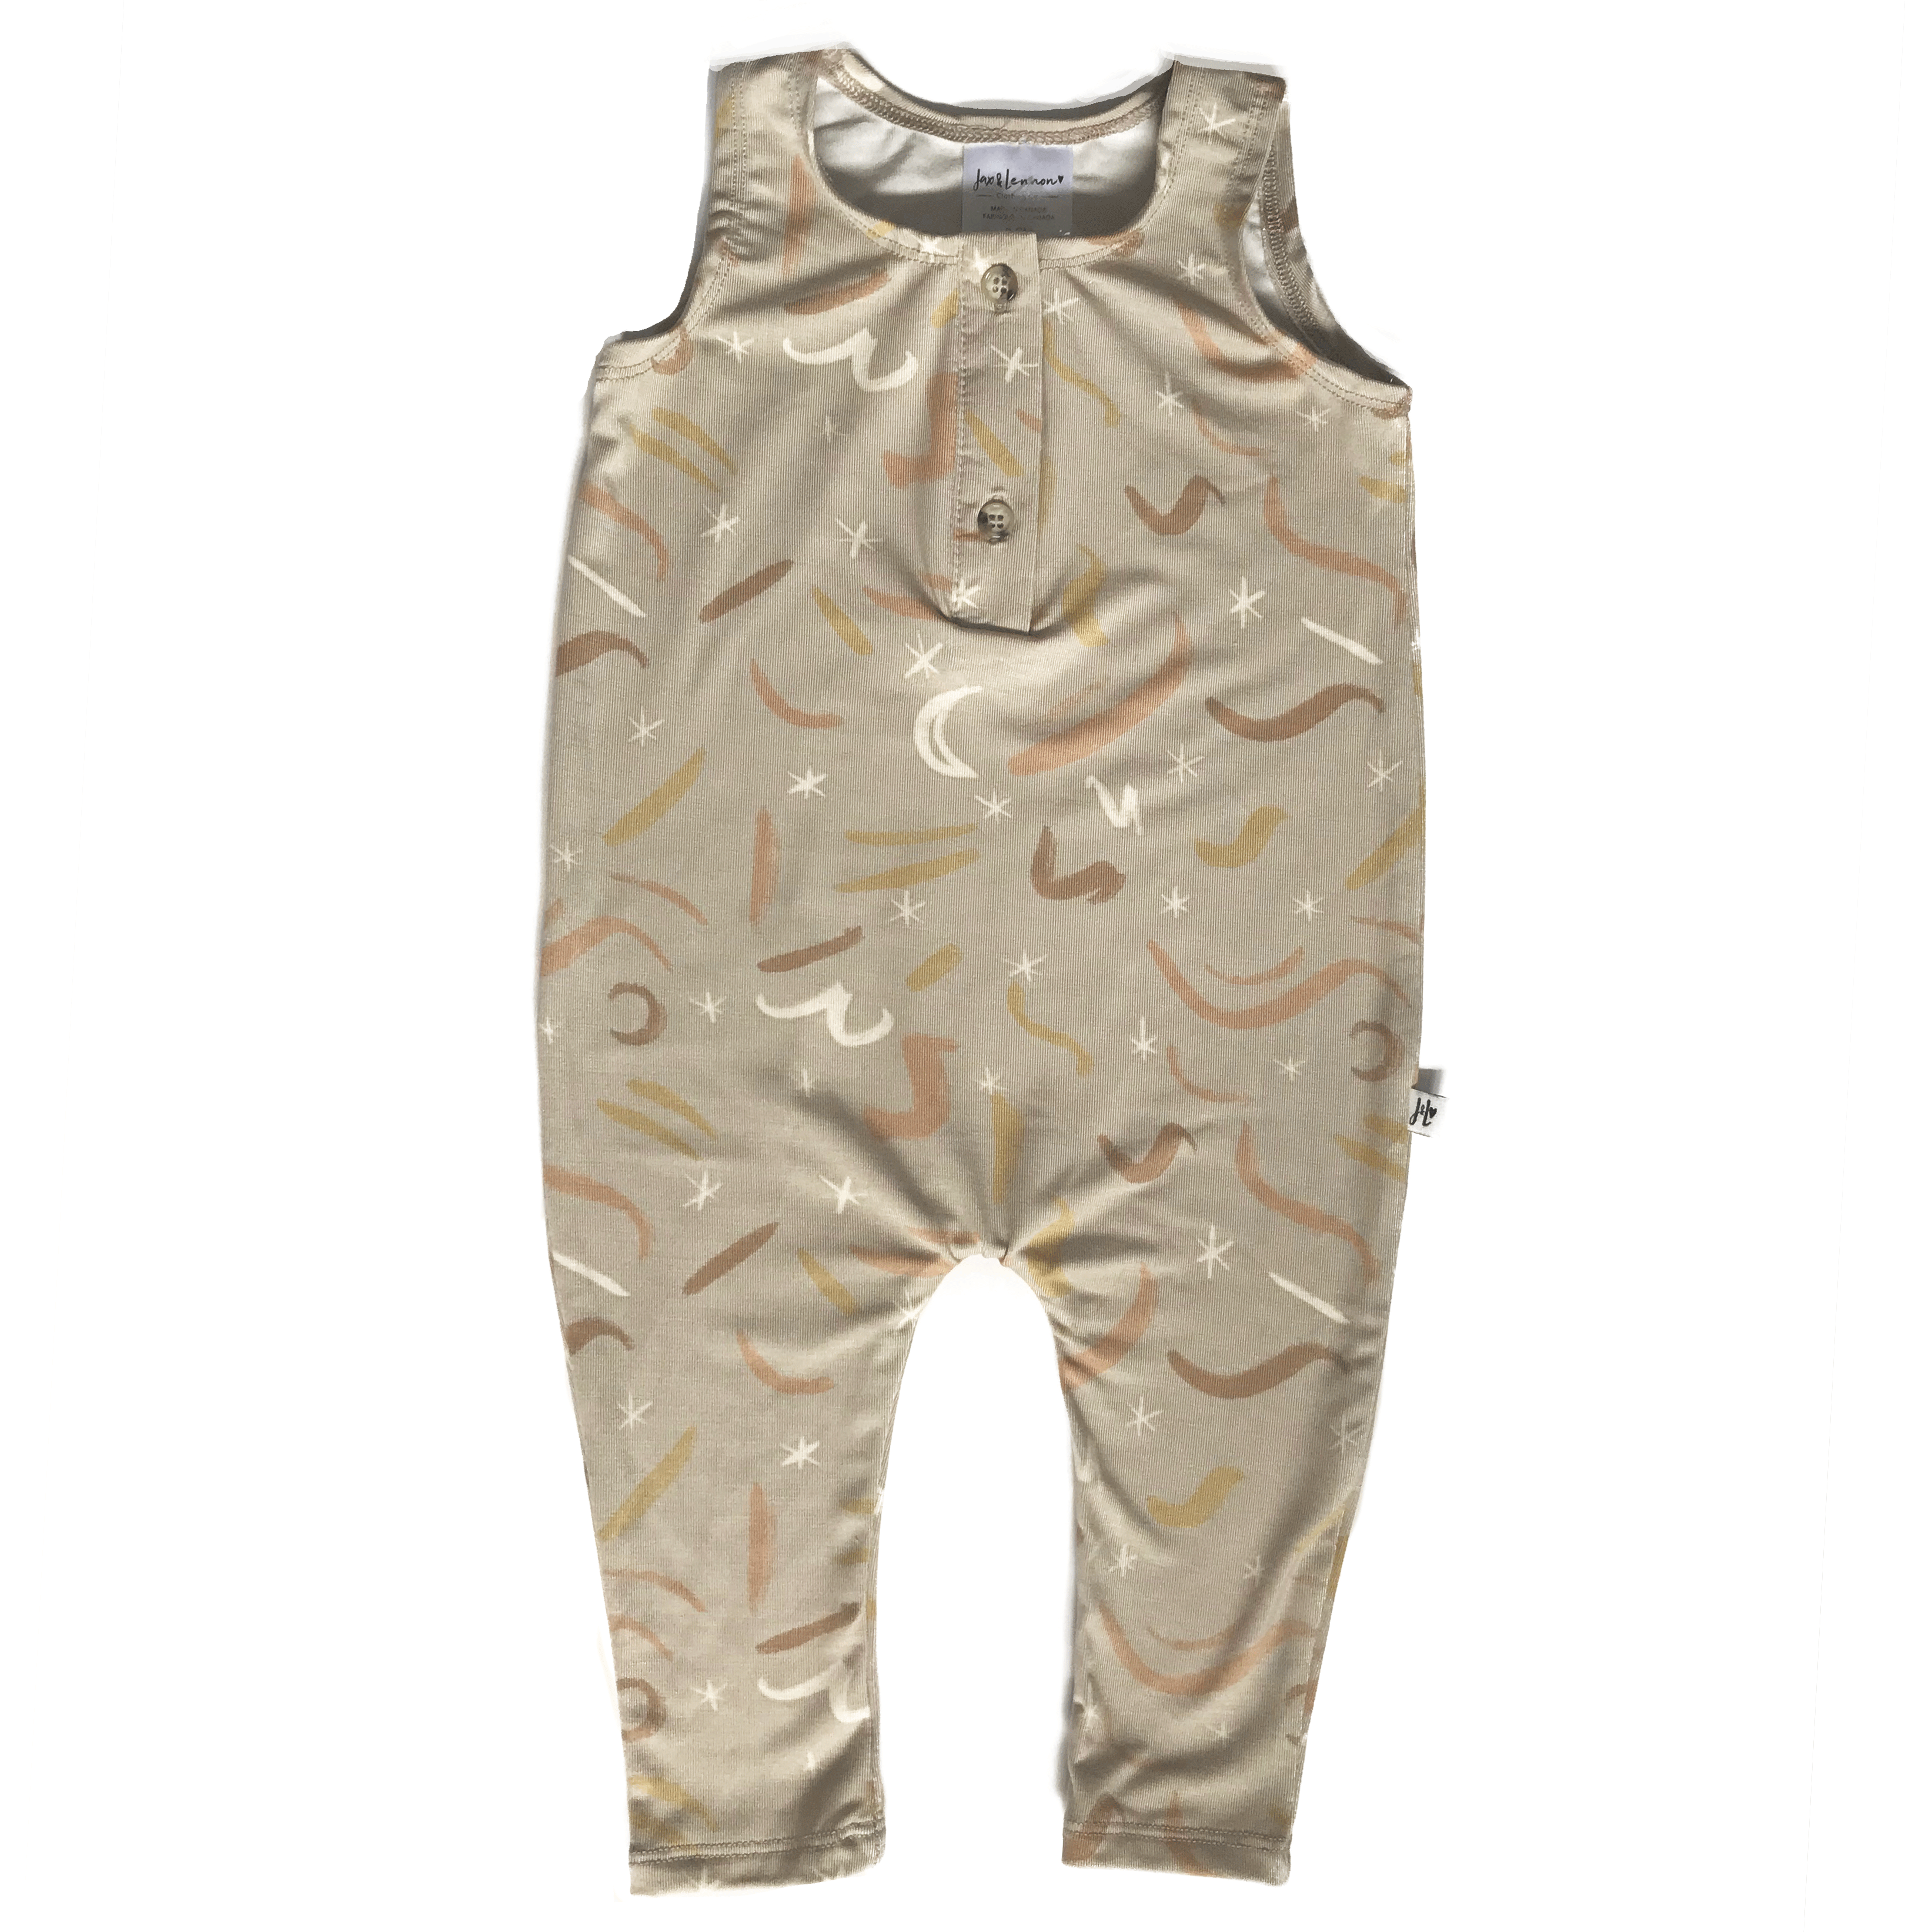 Soft Bamboo Tank Baby Romper at Bonjour Baby Baskets, perfect for your BYOB (Build Your Own Basket) 